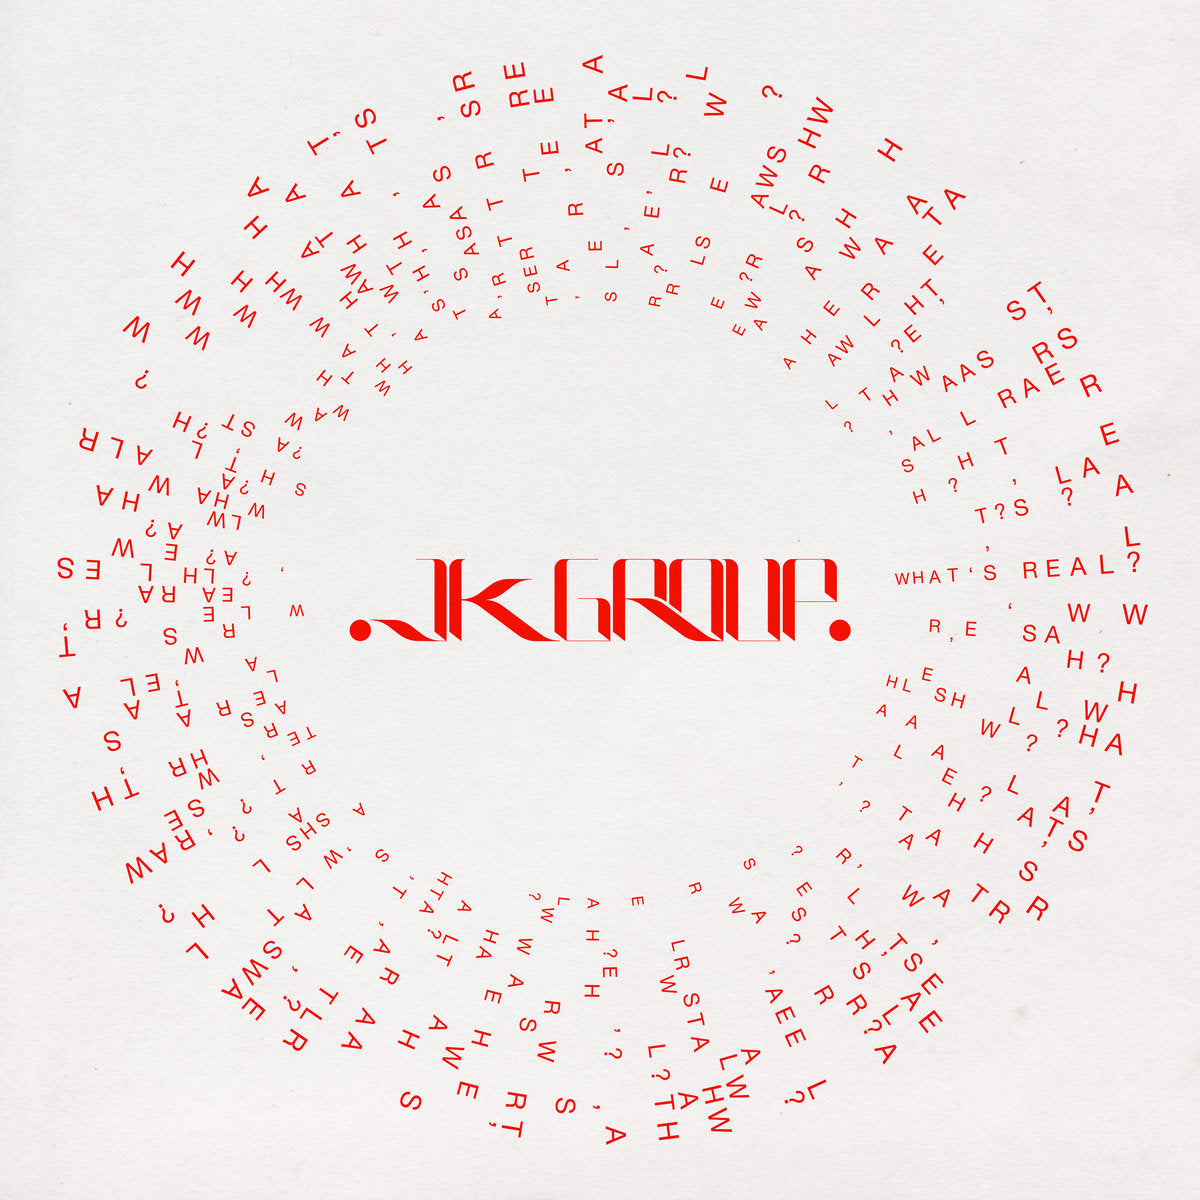 JK GROUP - "WHAT'S REAL?" LP